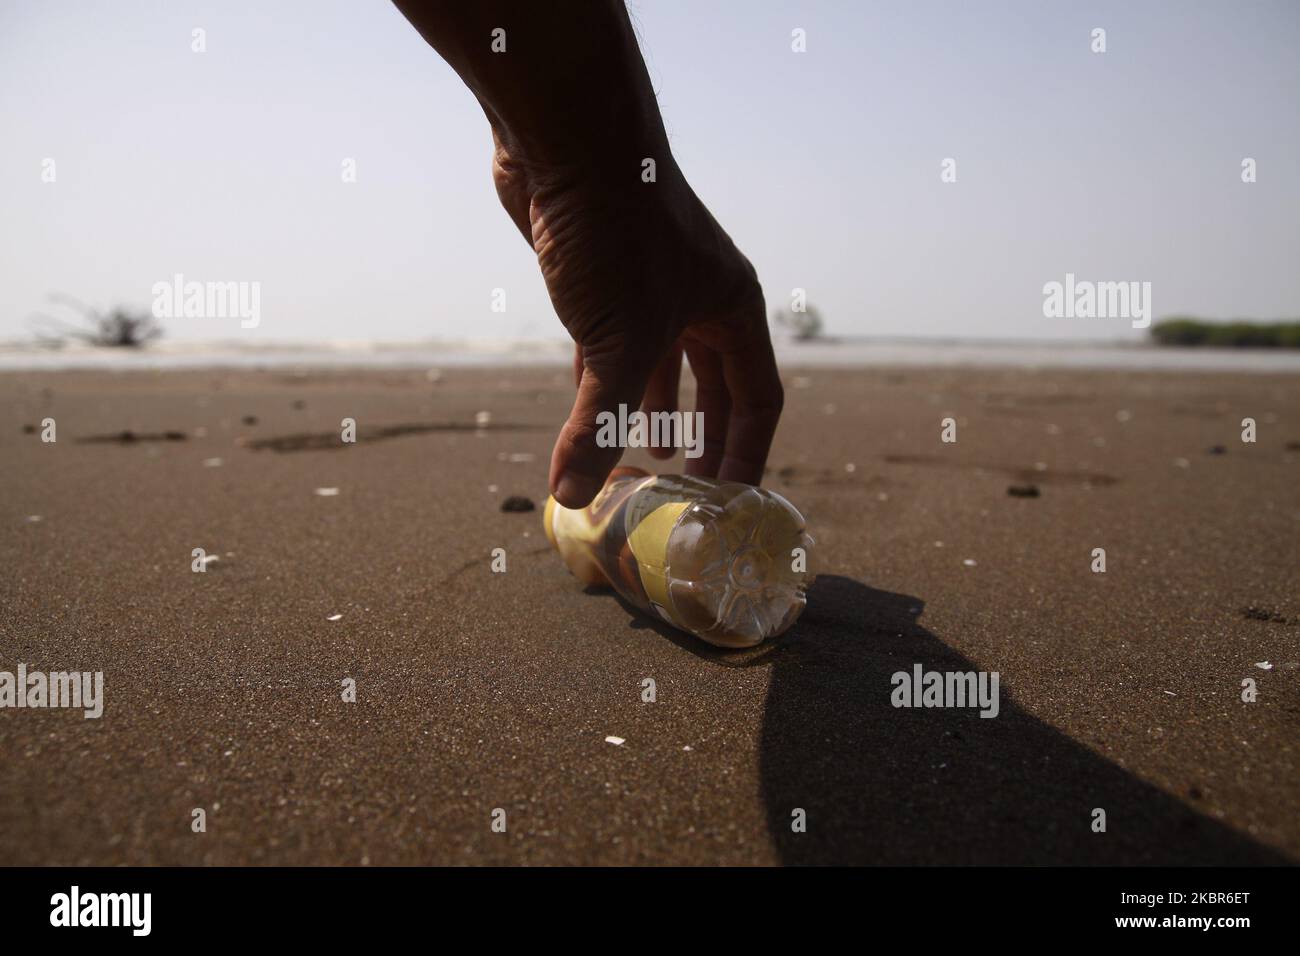 A man picks up the plastic bottle waste left by the tourist on the beach at Pantai Bahagia, Muara Gembong sub-district, Bekasi regency, West Java province, on June 13, 2020. According to the research reports from the Indonesian Institute of Sciences (LIPI), released in 2018, the amount of plastic waste in the Indonesian sea reaches 100.000 - 400.000 tons per year, with an average coastline spread of arround 1.71 pieces per square meter with an average weight of 46.55 grams per square meter. While the highest average plastic waste was found on the coast of Sulawesi, reaching 2.11 pieces per squ Stock Photo